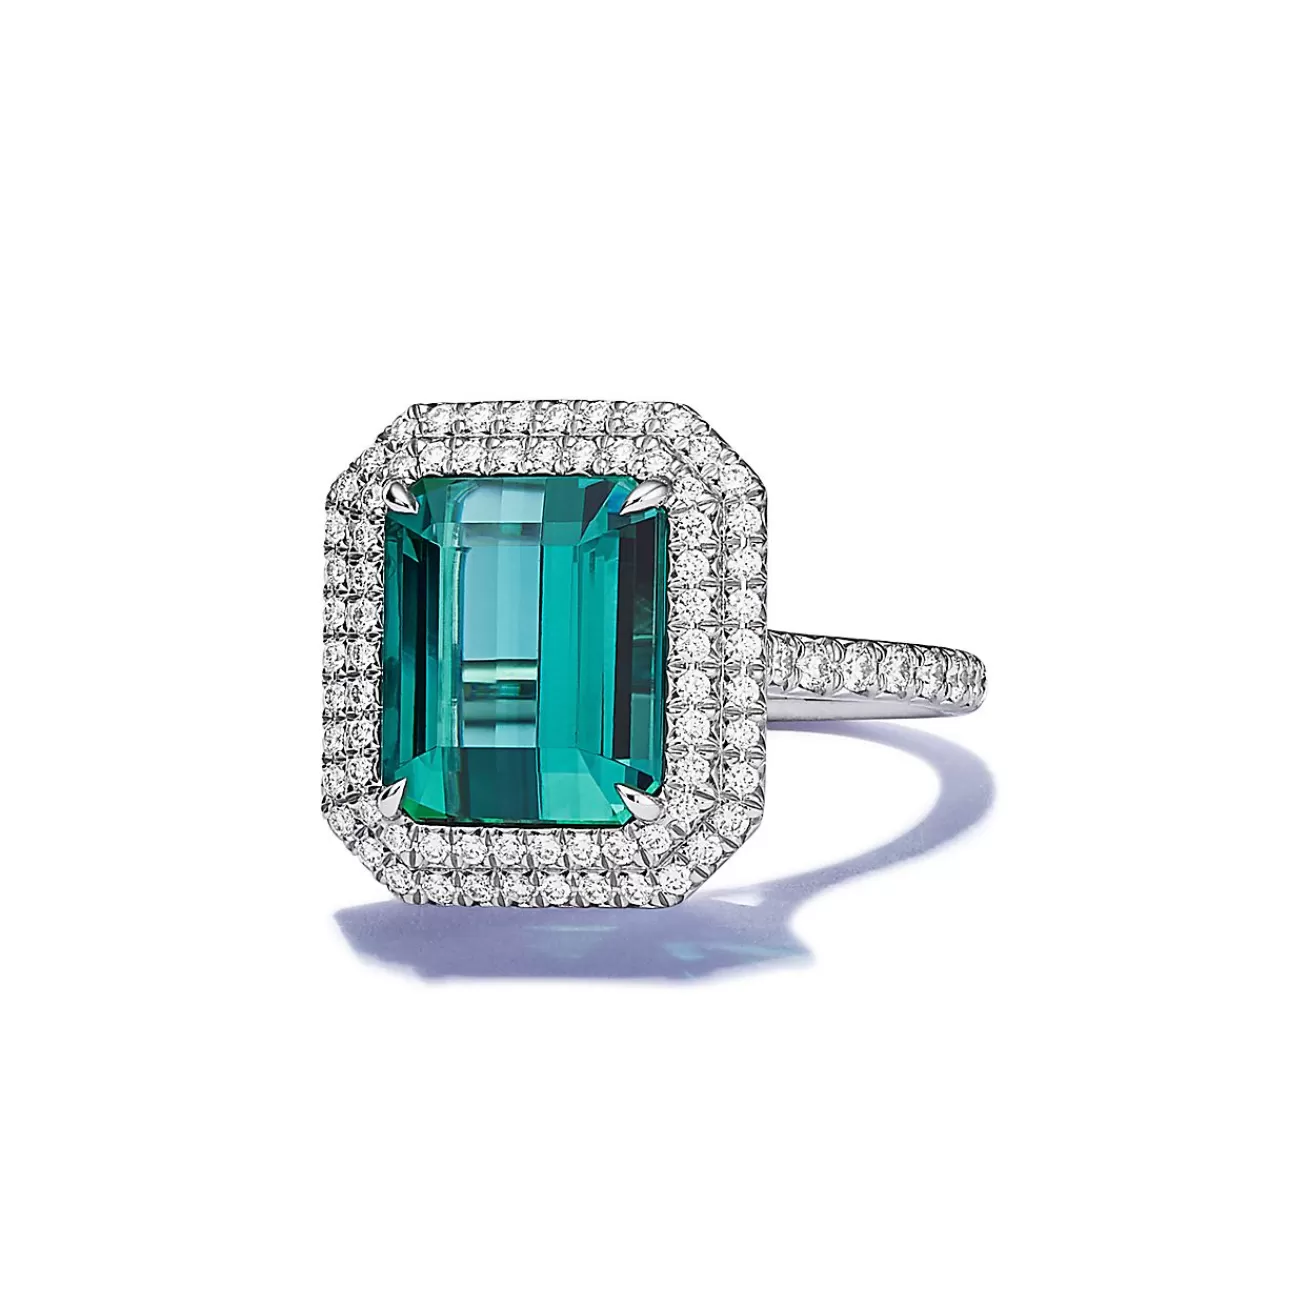 Tiffany & Co. Ring in Platinum with a Green Tourmaline and Diamonds | ^ Rings | Diamond Jewelry